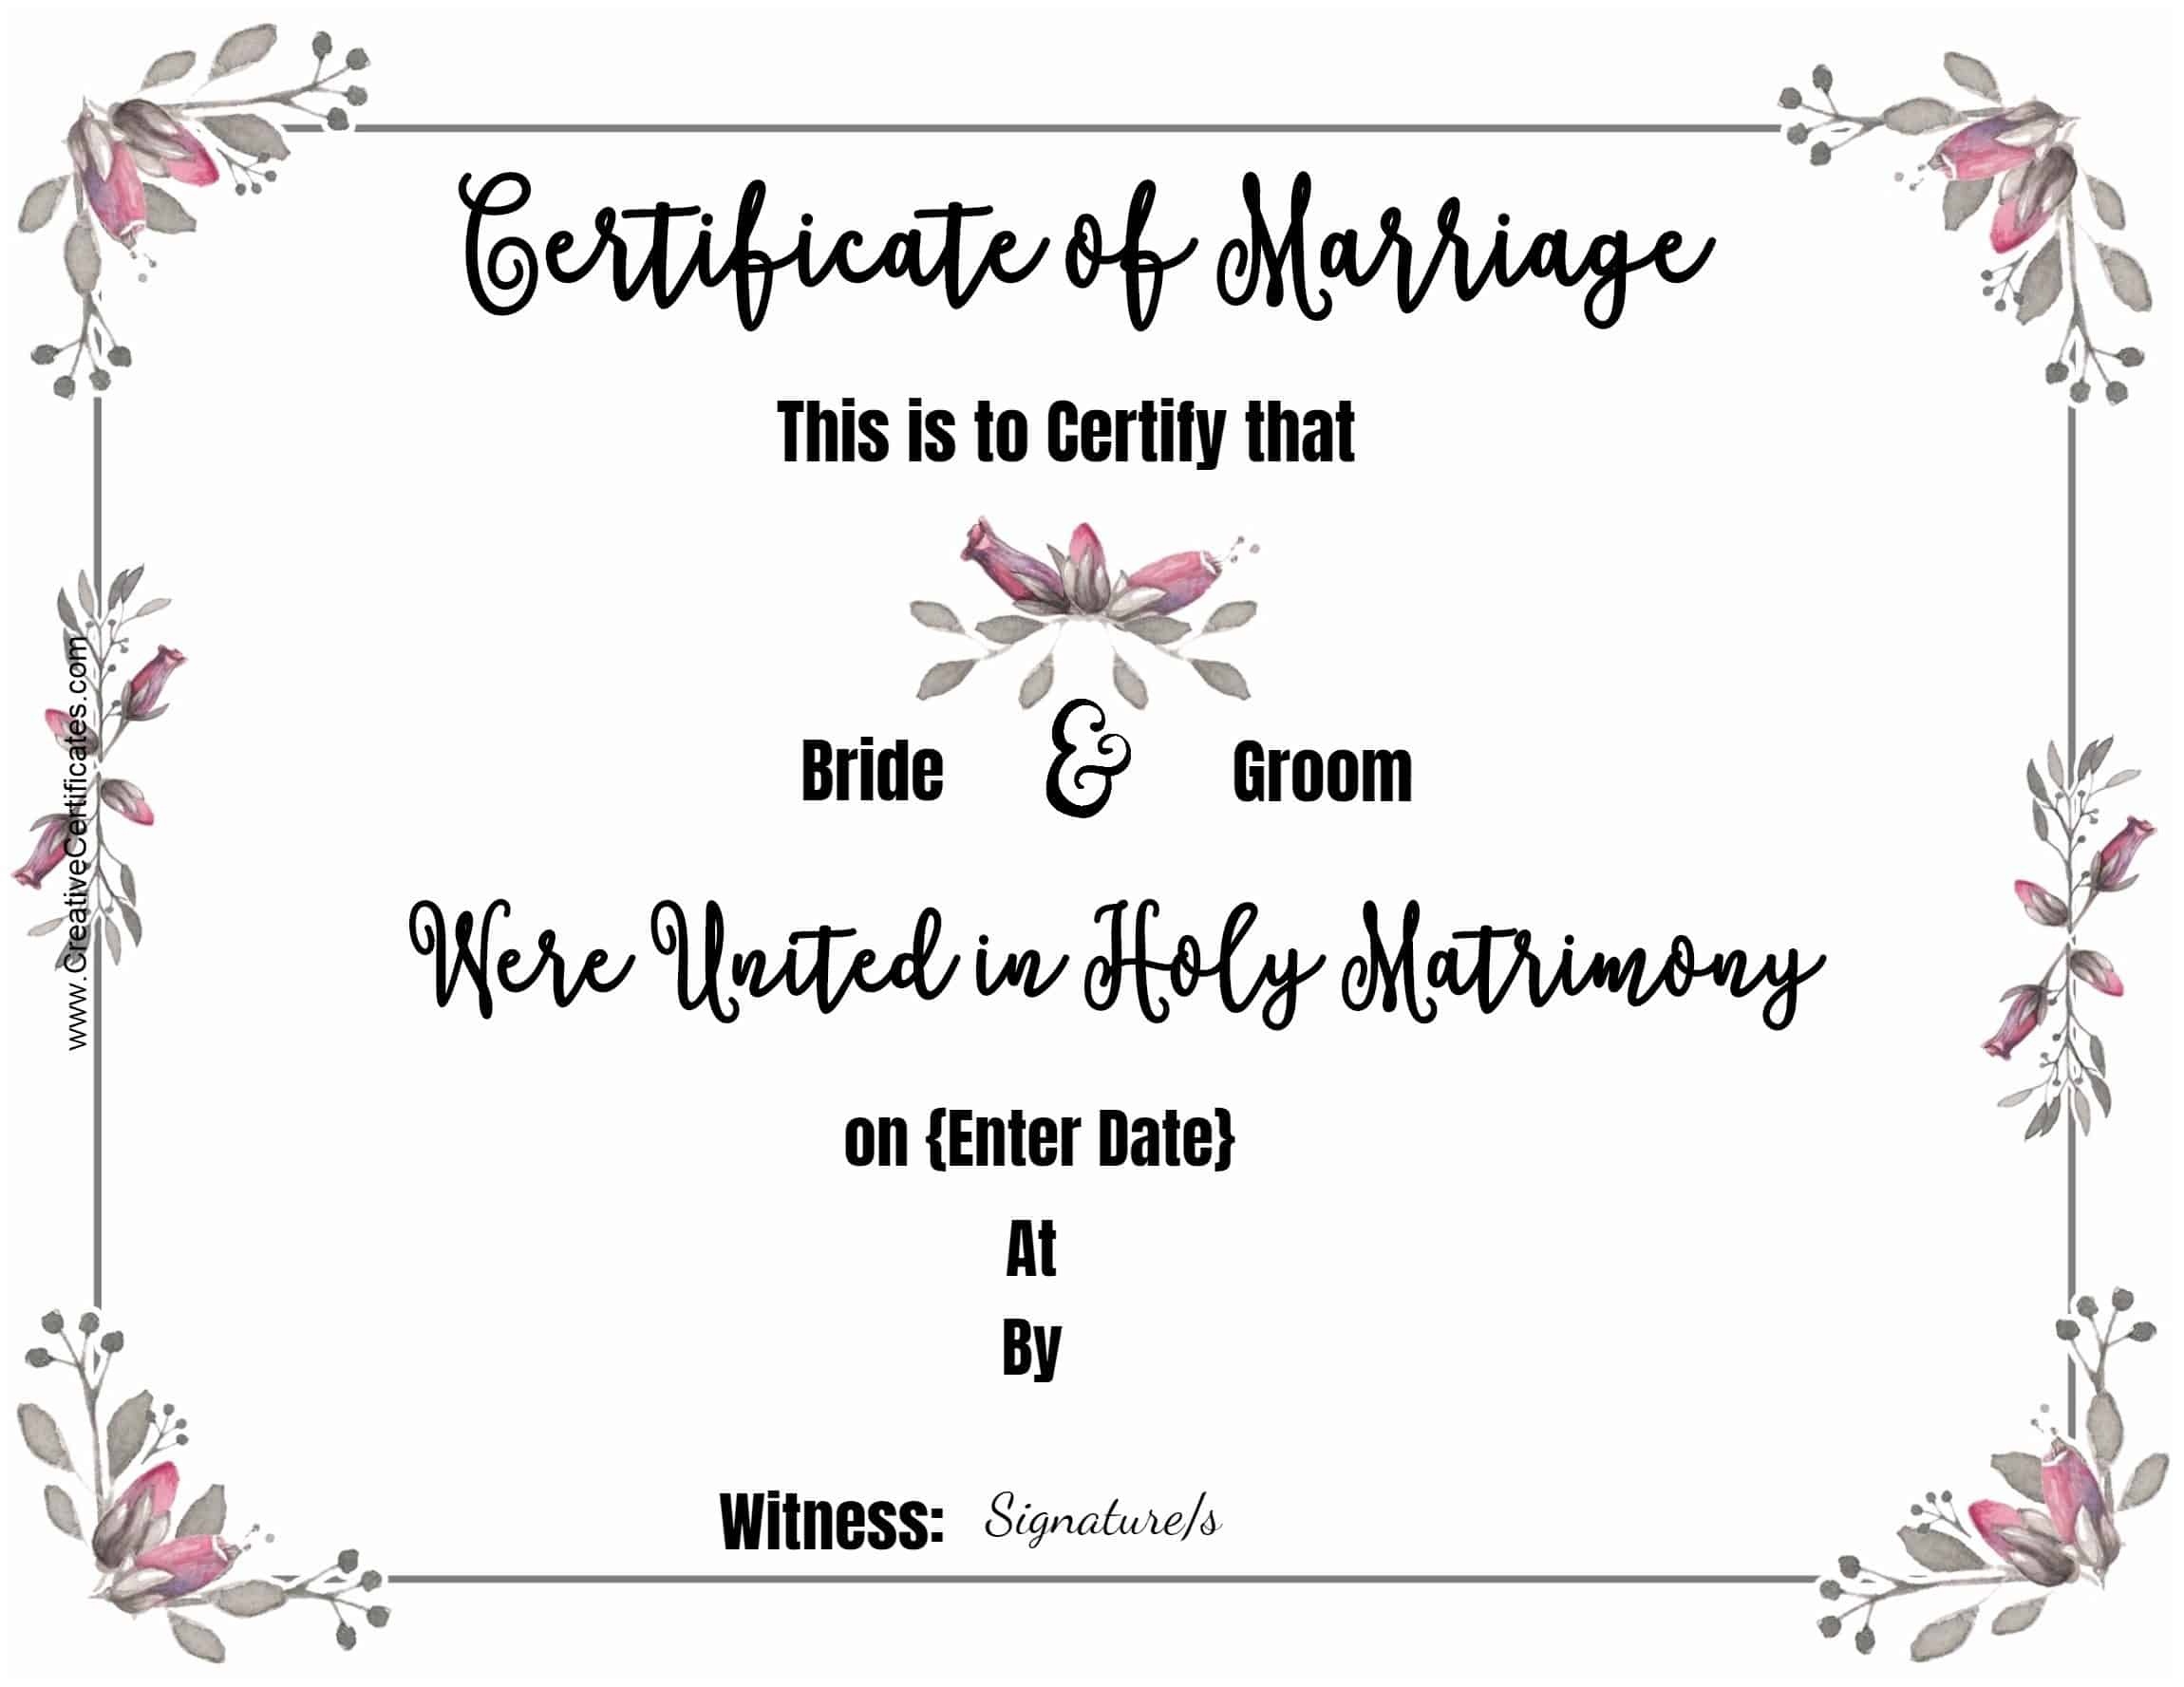 Free Marriage Certificate Template | Customize Online Then Print - Fake Marriage Certificate Printable Free